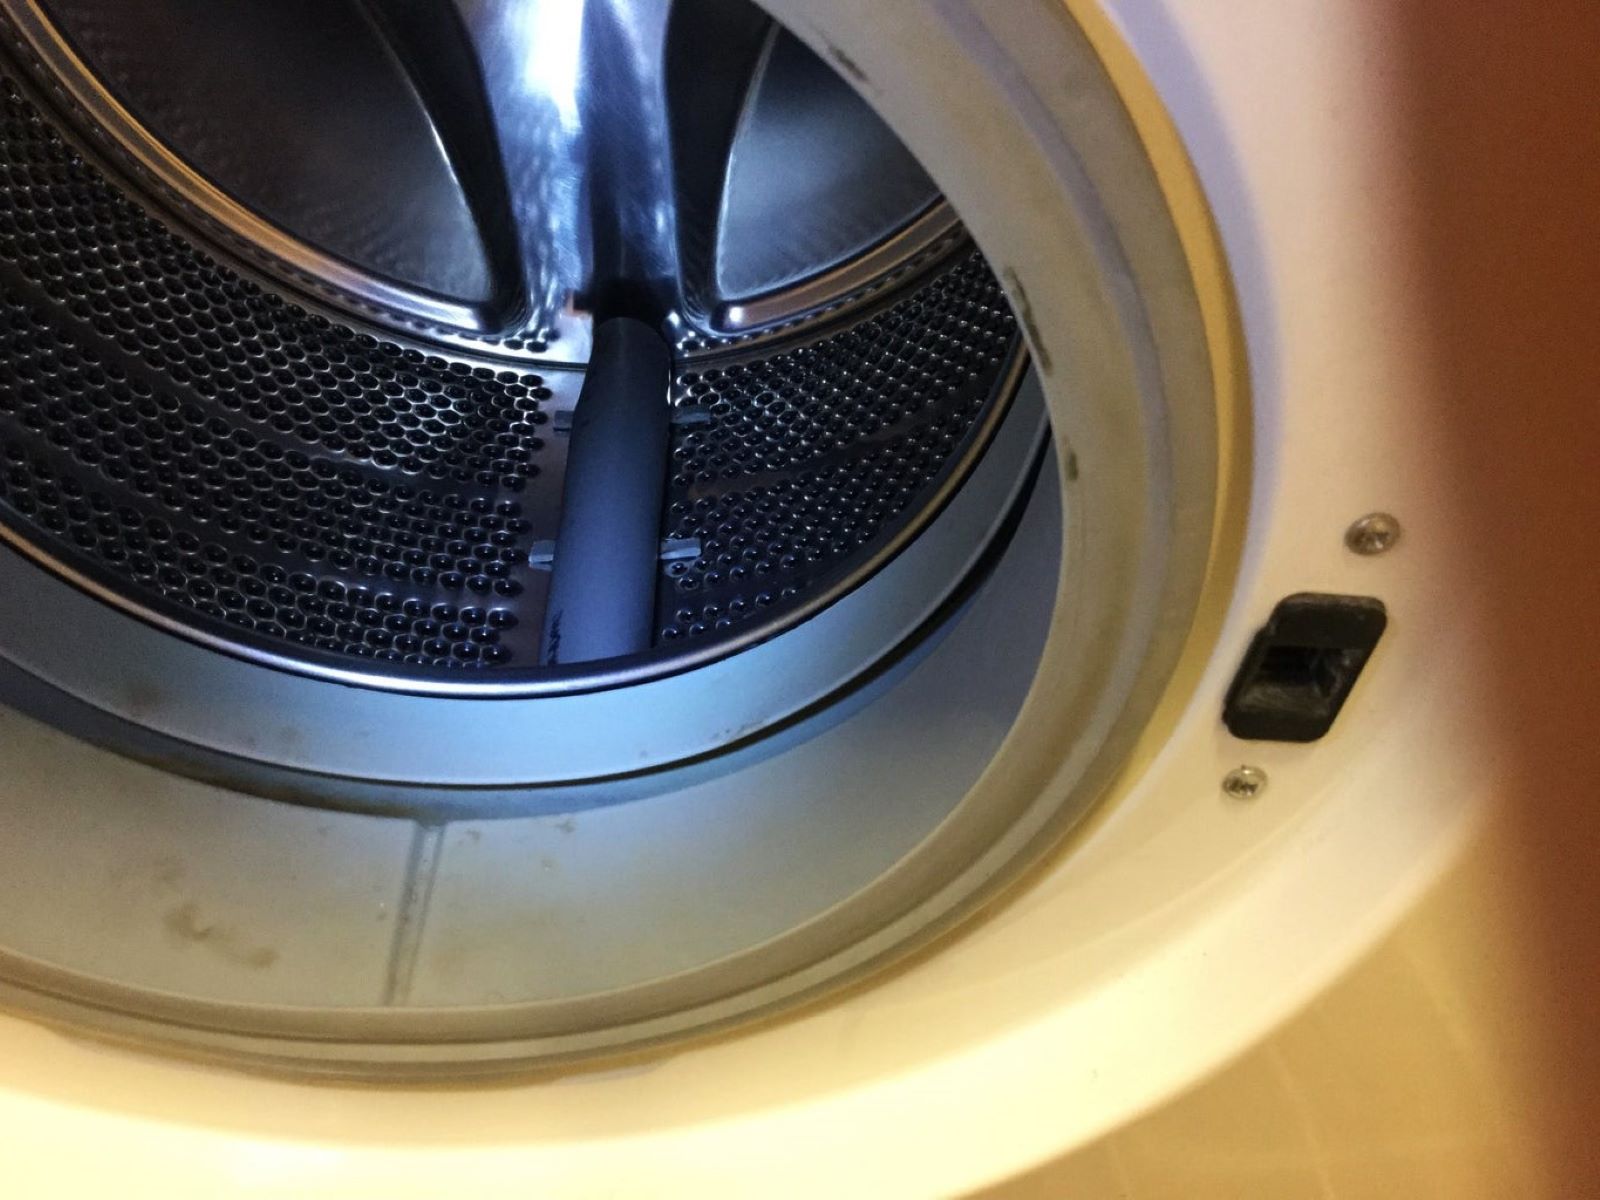 How To Take The Drum Out Of A Washing Machine